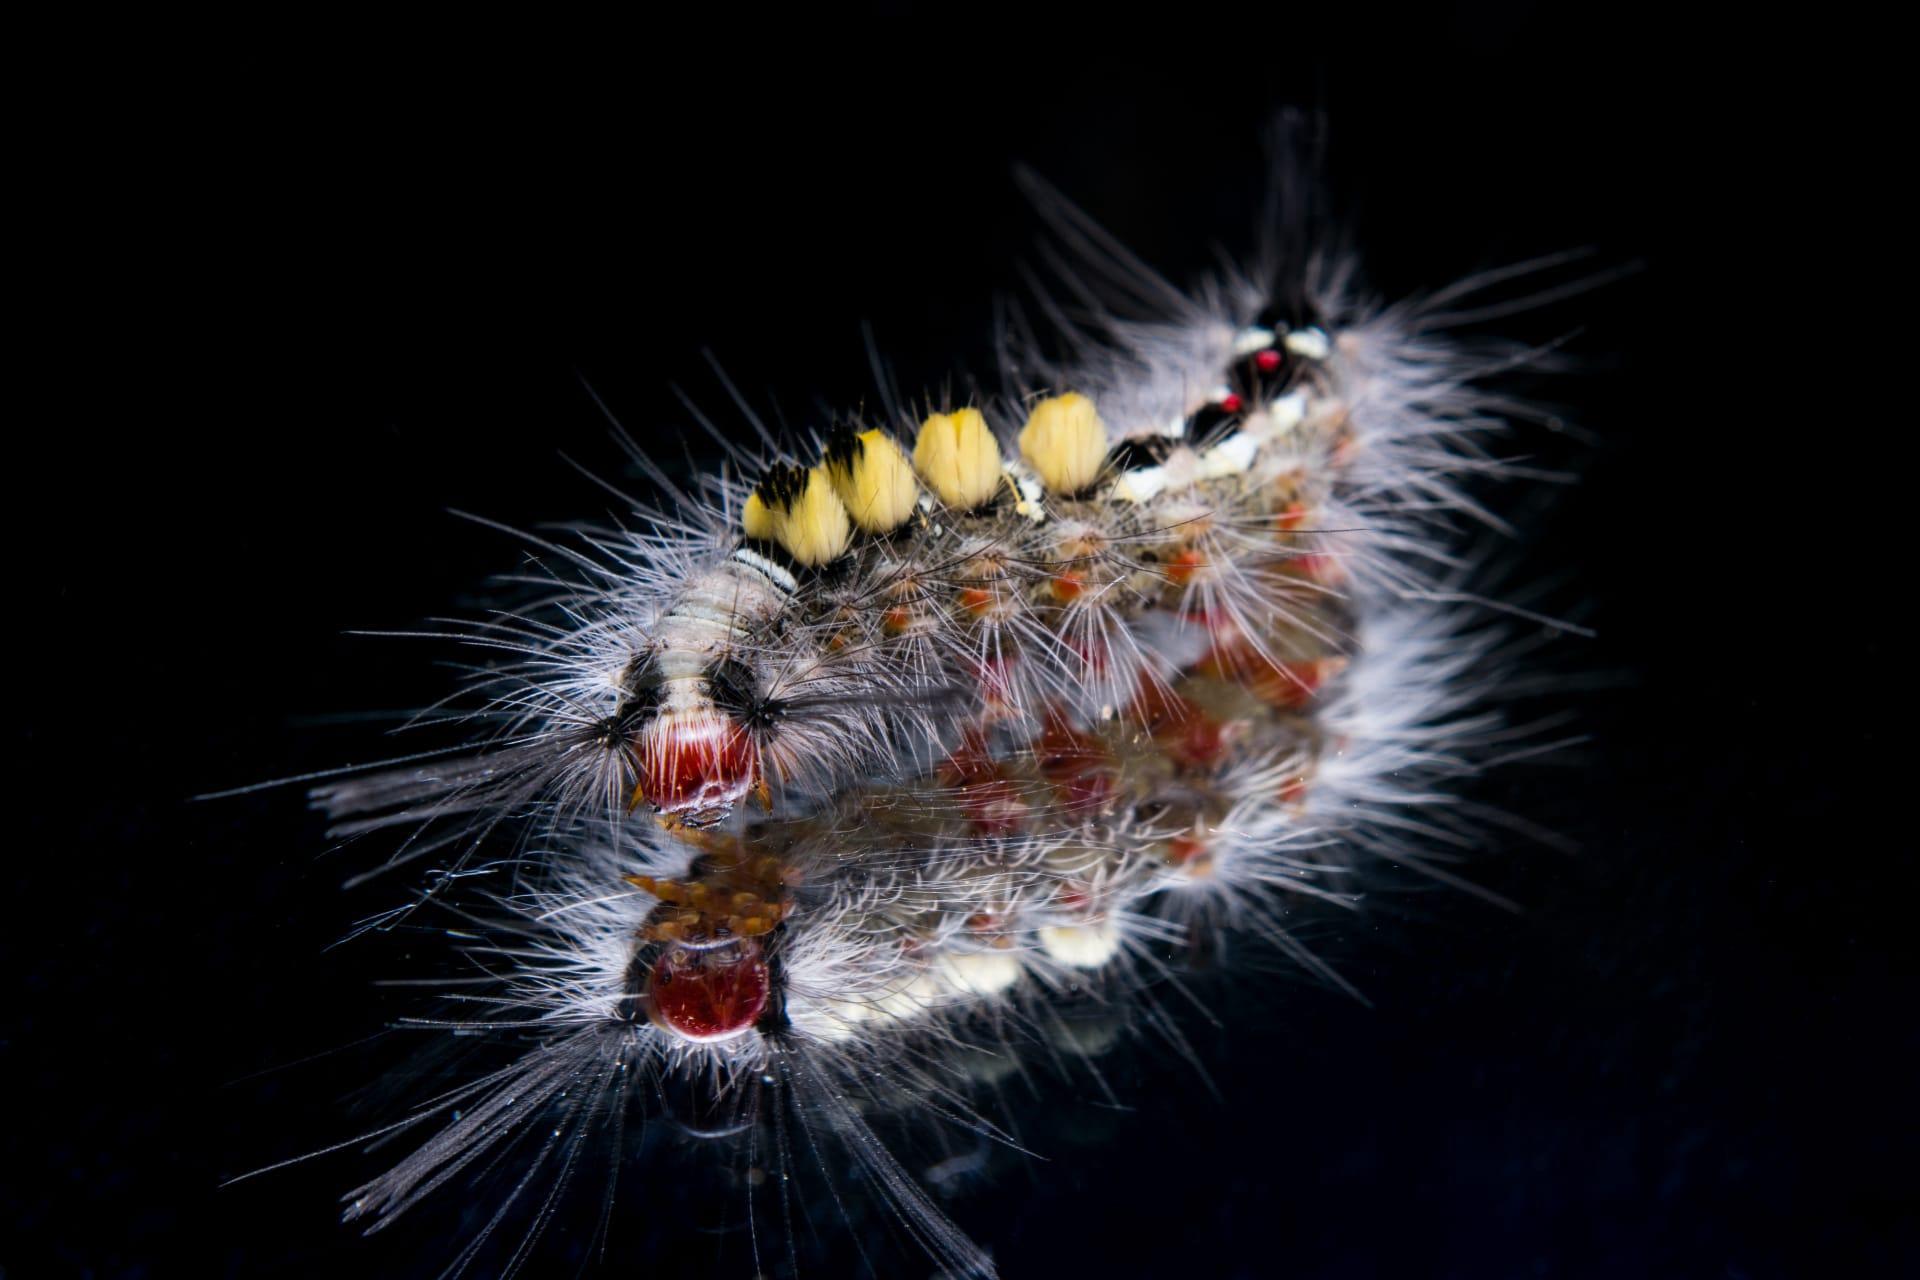 Caterpillar insect pictures